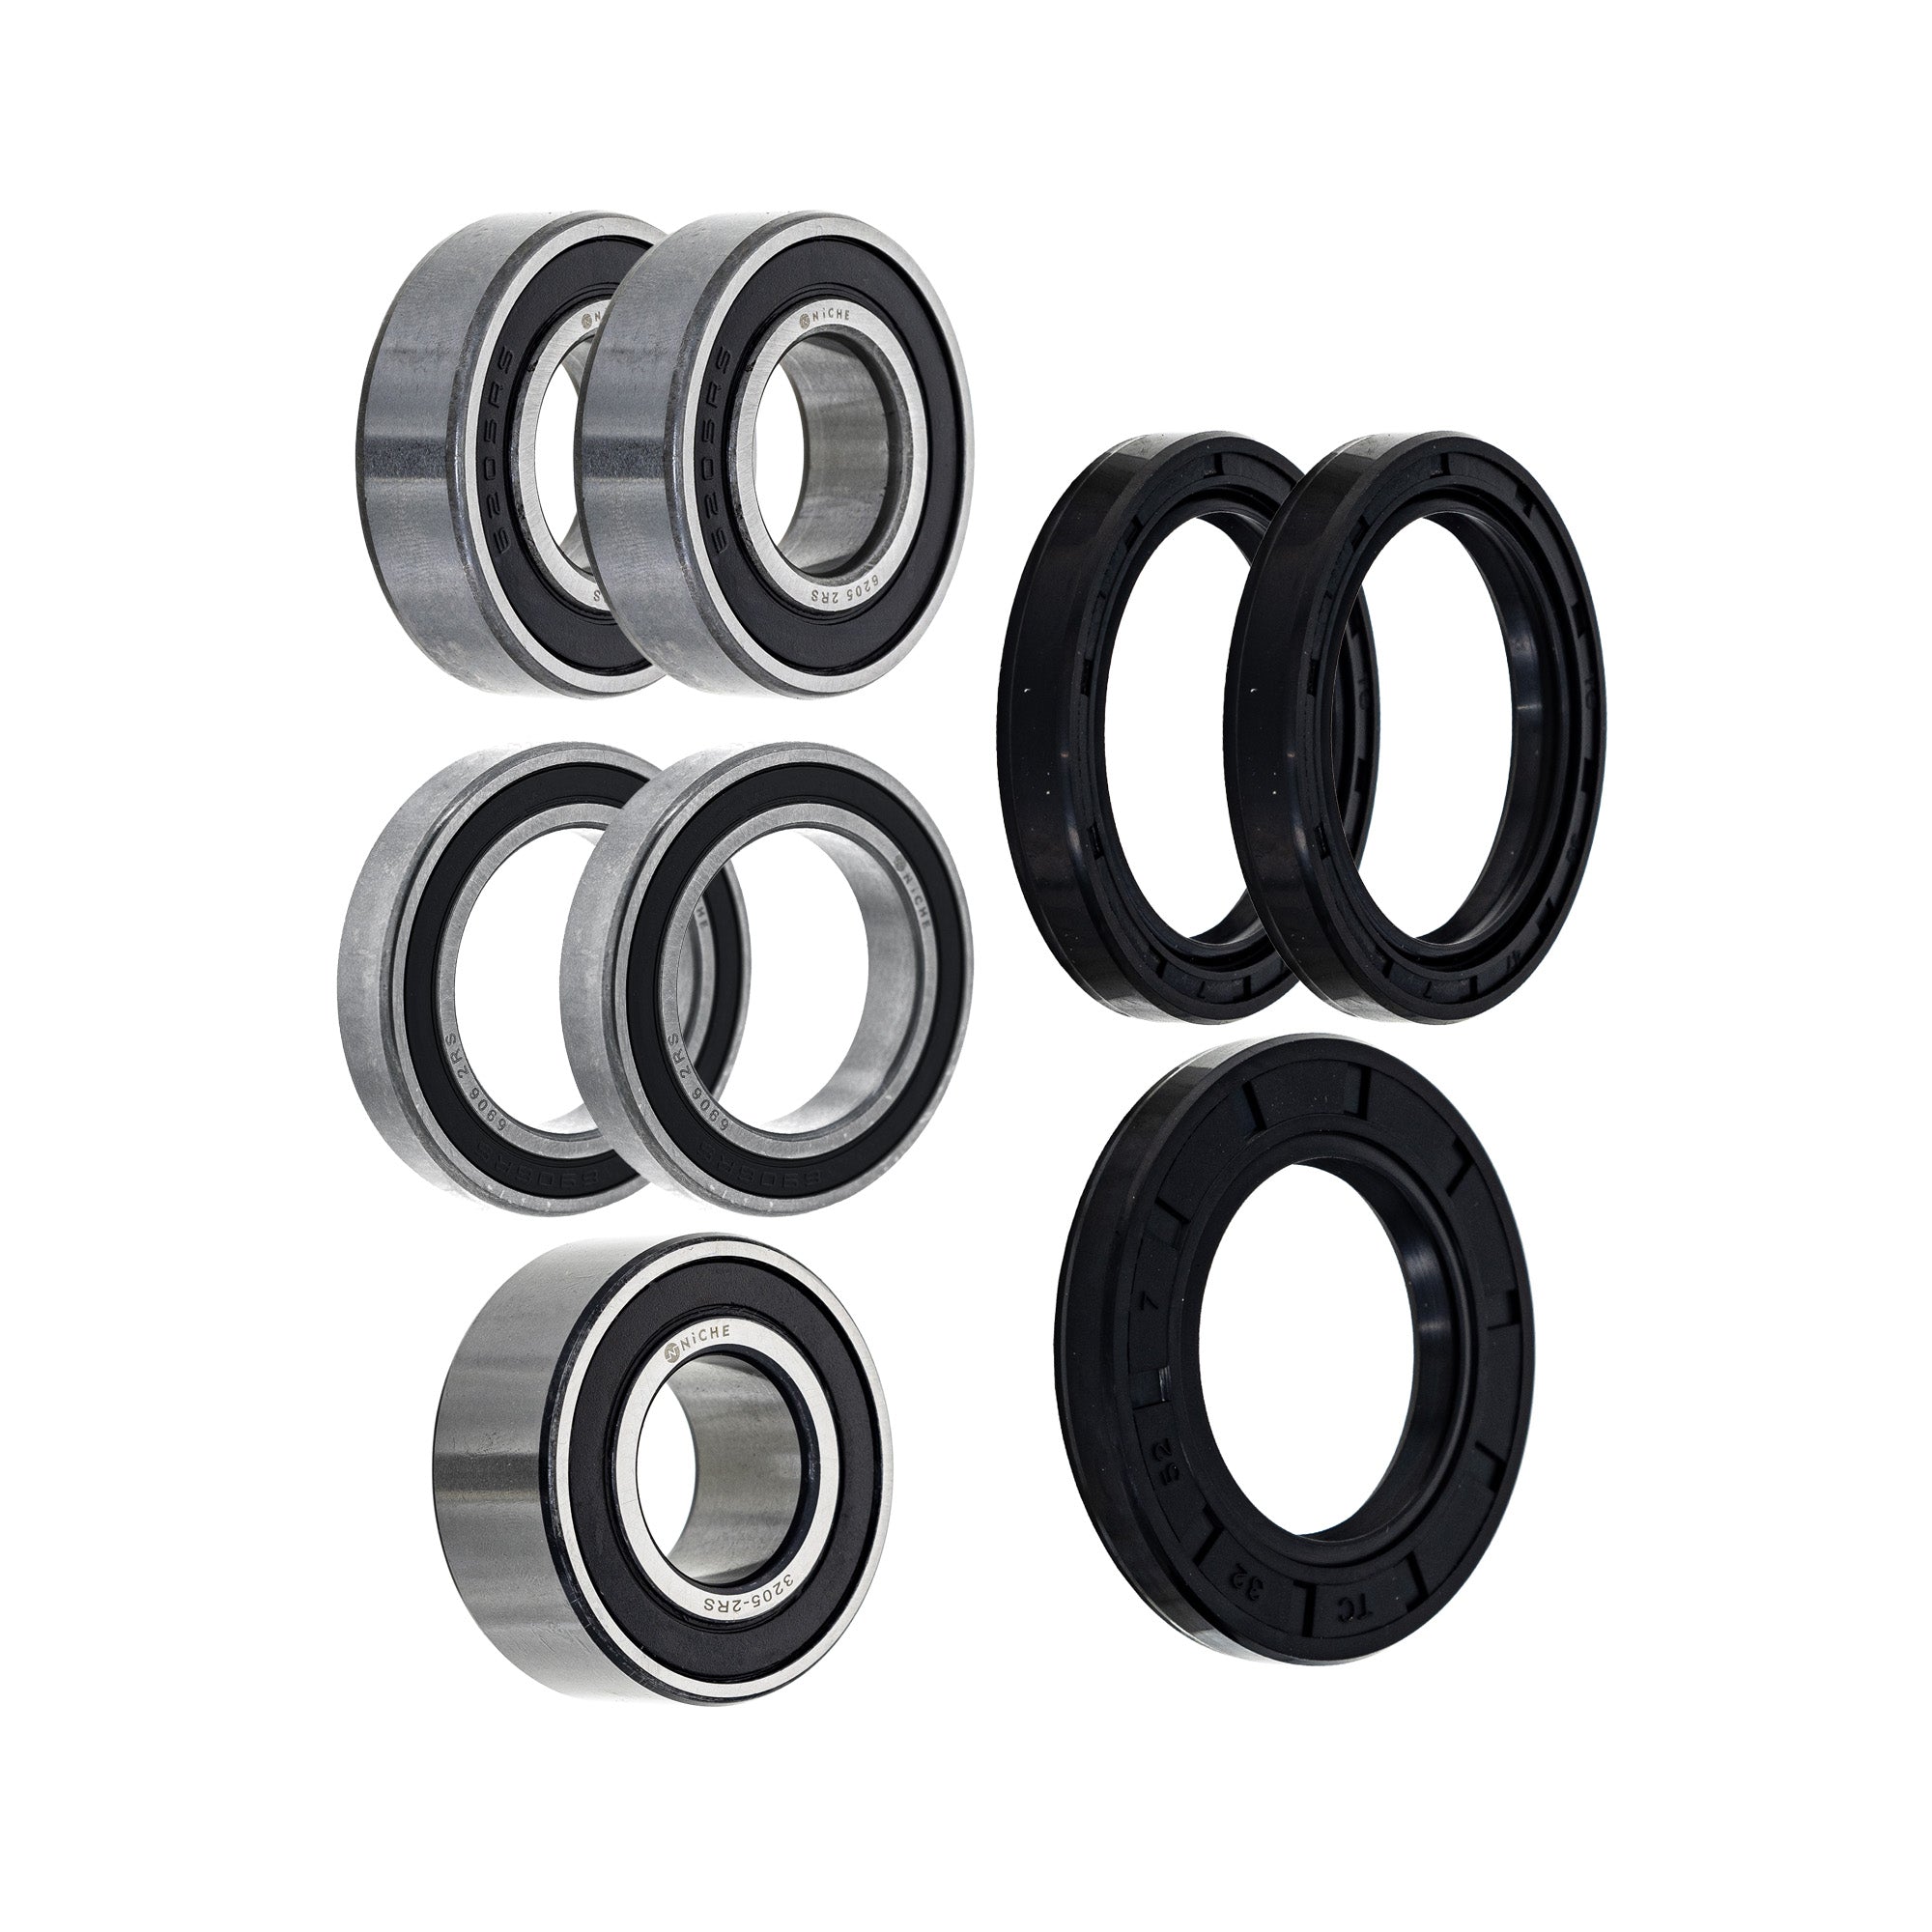 Wheel Bearing Seal Kit for zOTHER Ref No 640 NICHE MK1008728